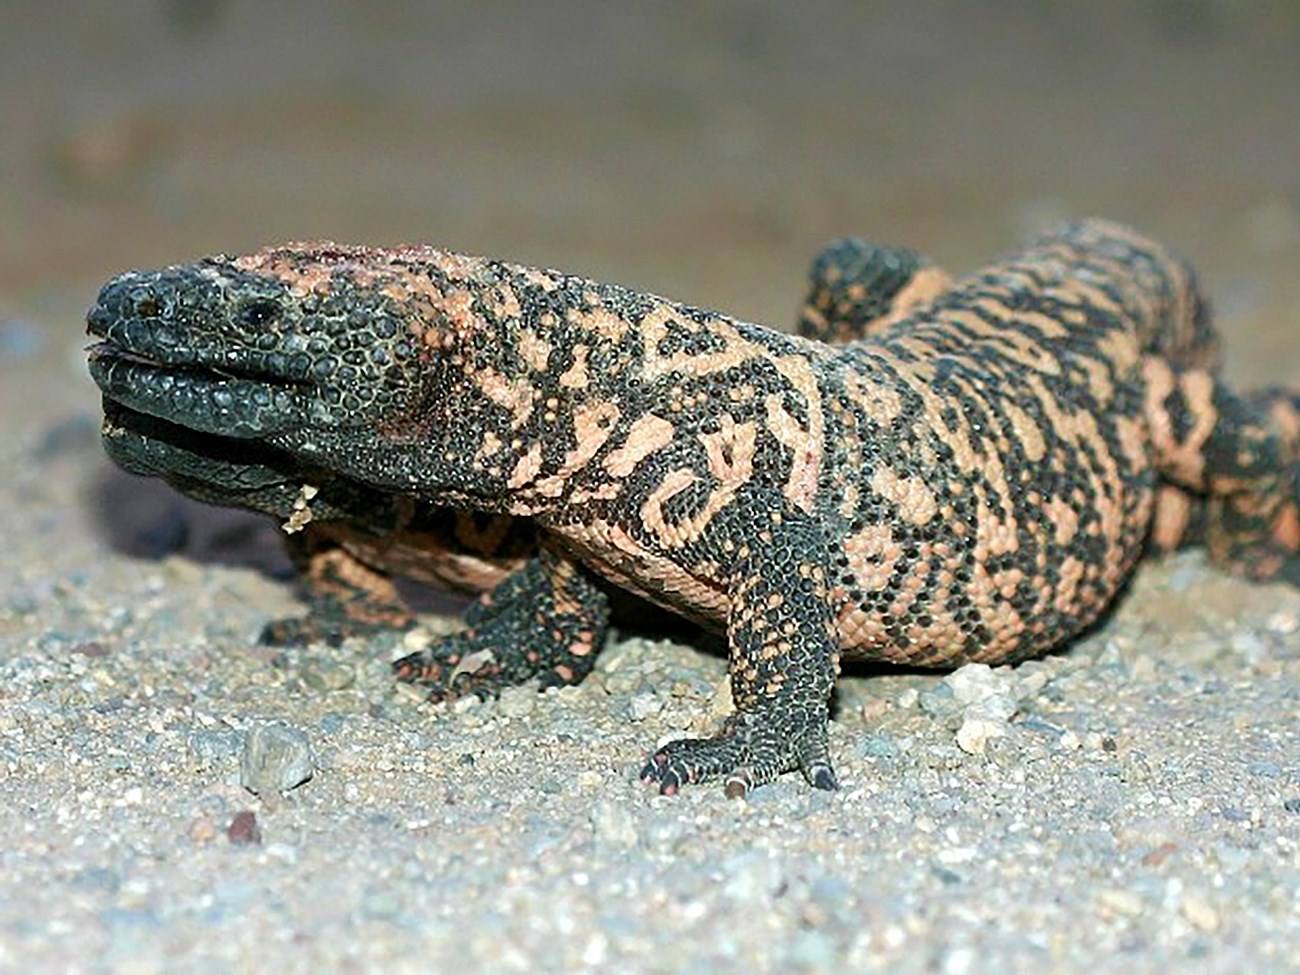 Colorful lizard with raised reddish and black markings